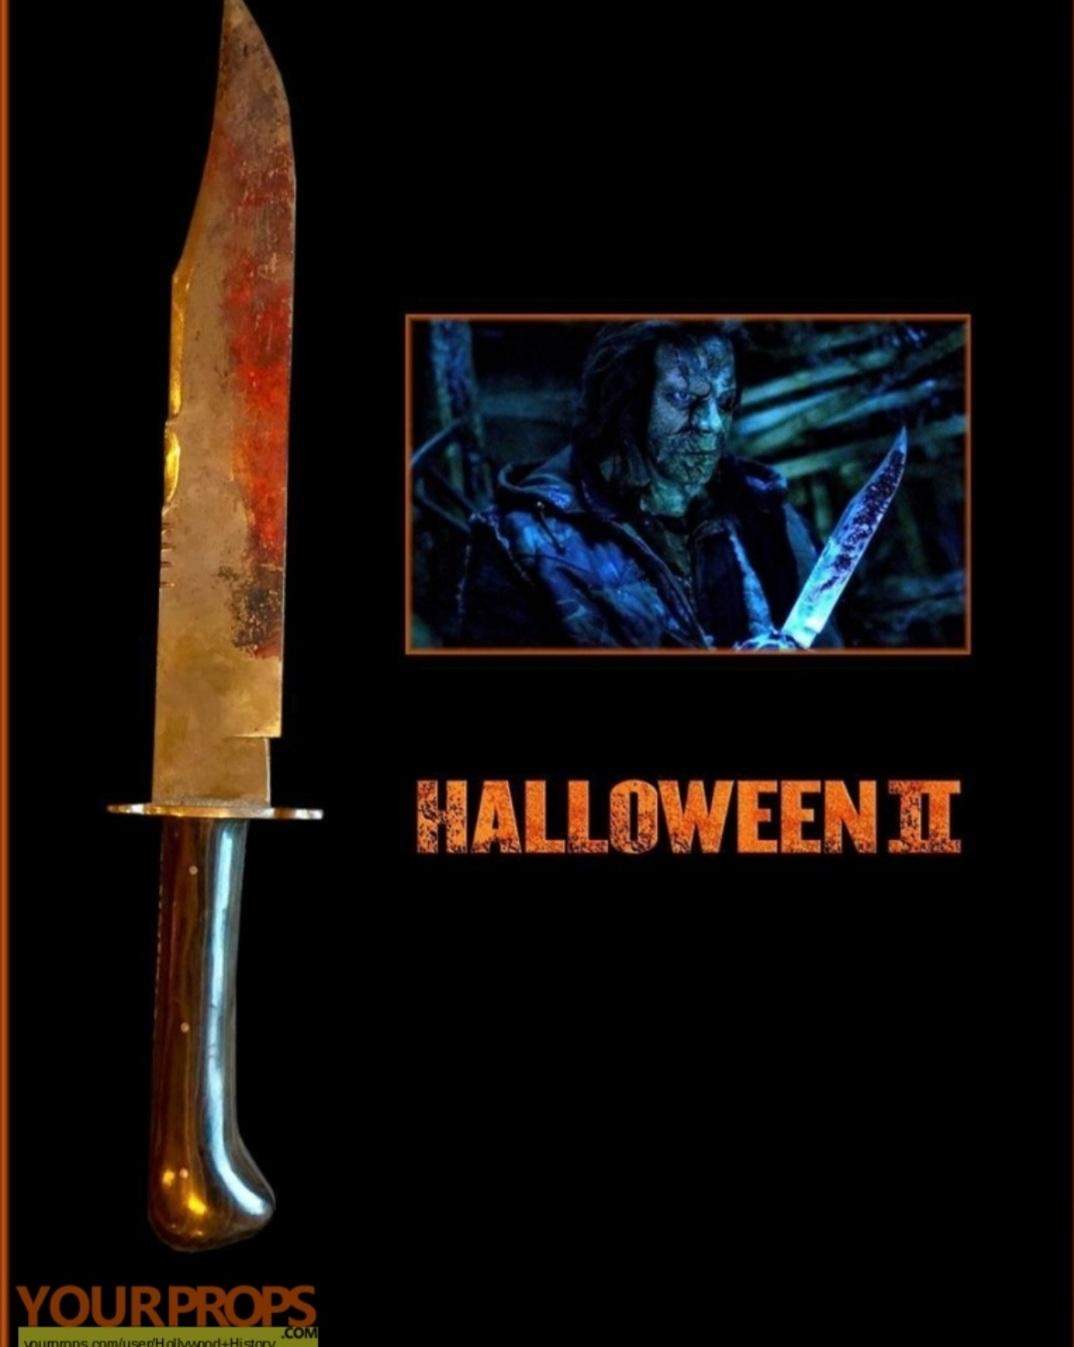 michael myers bowie knife